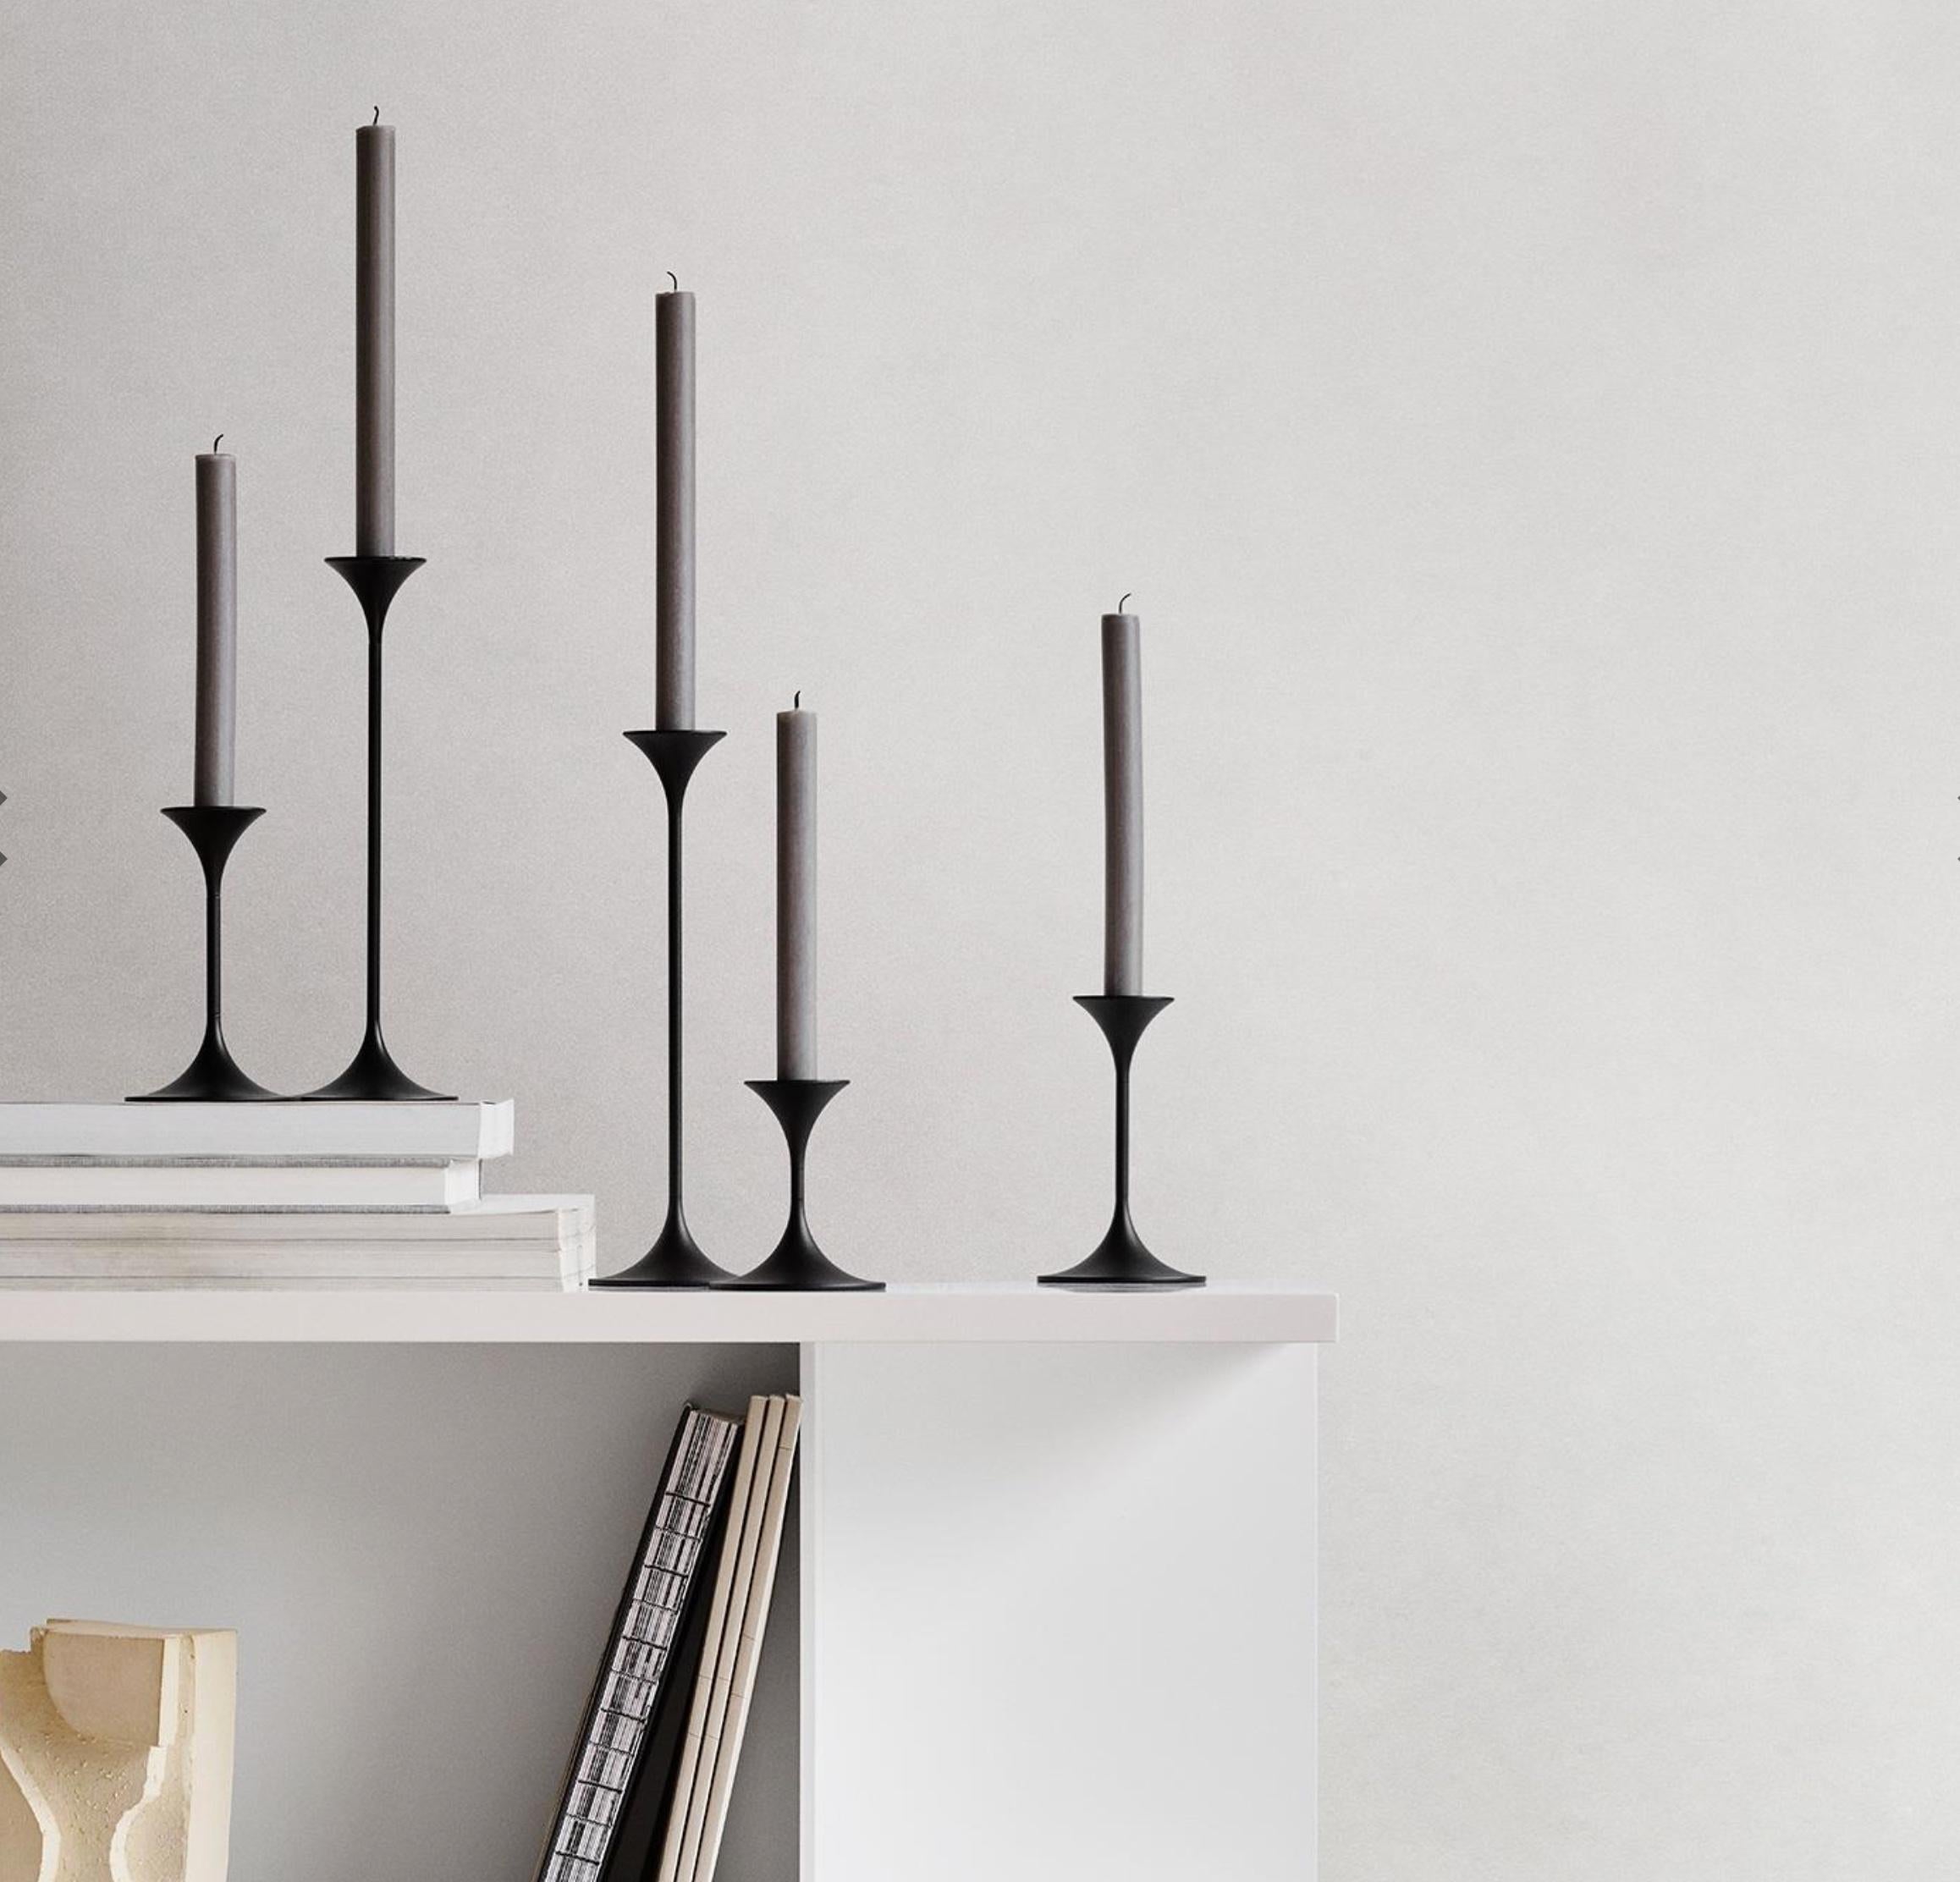 Elegant and with a hint of whimsy, the modular candleholder Jazz was conceived in 1961 by Danish architect, ceramist and jazz musician Max Brüel. A slender, graceful silhouette in three heights, Jazz is an elegant addition to the home – by itself or